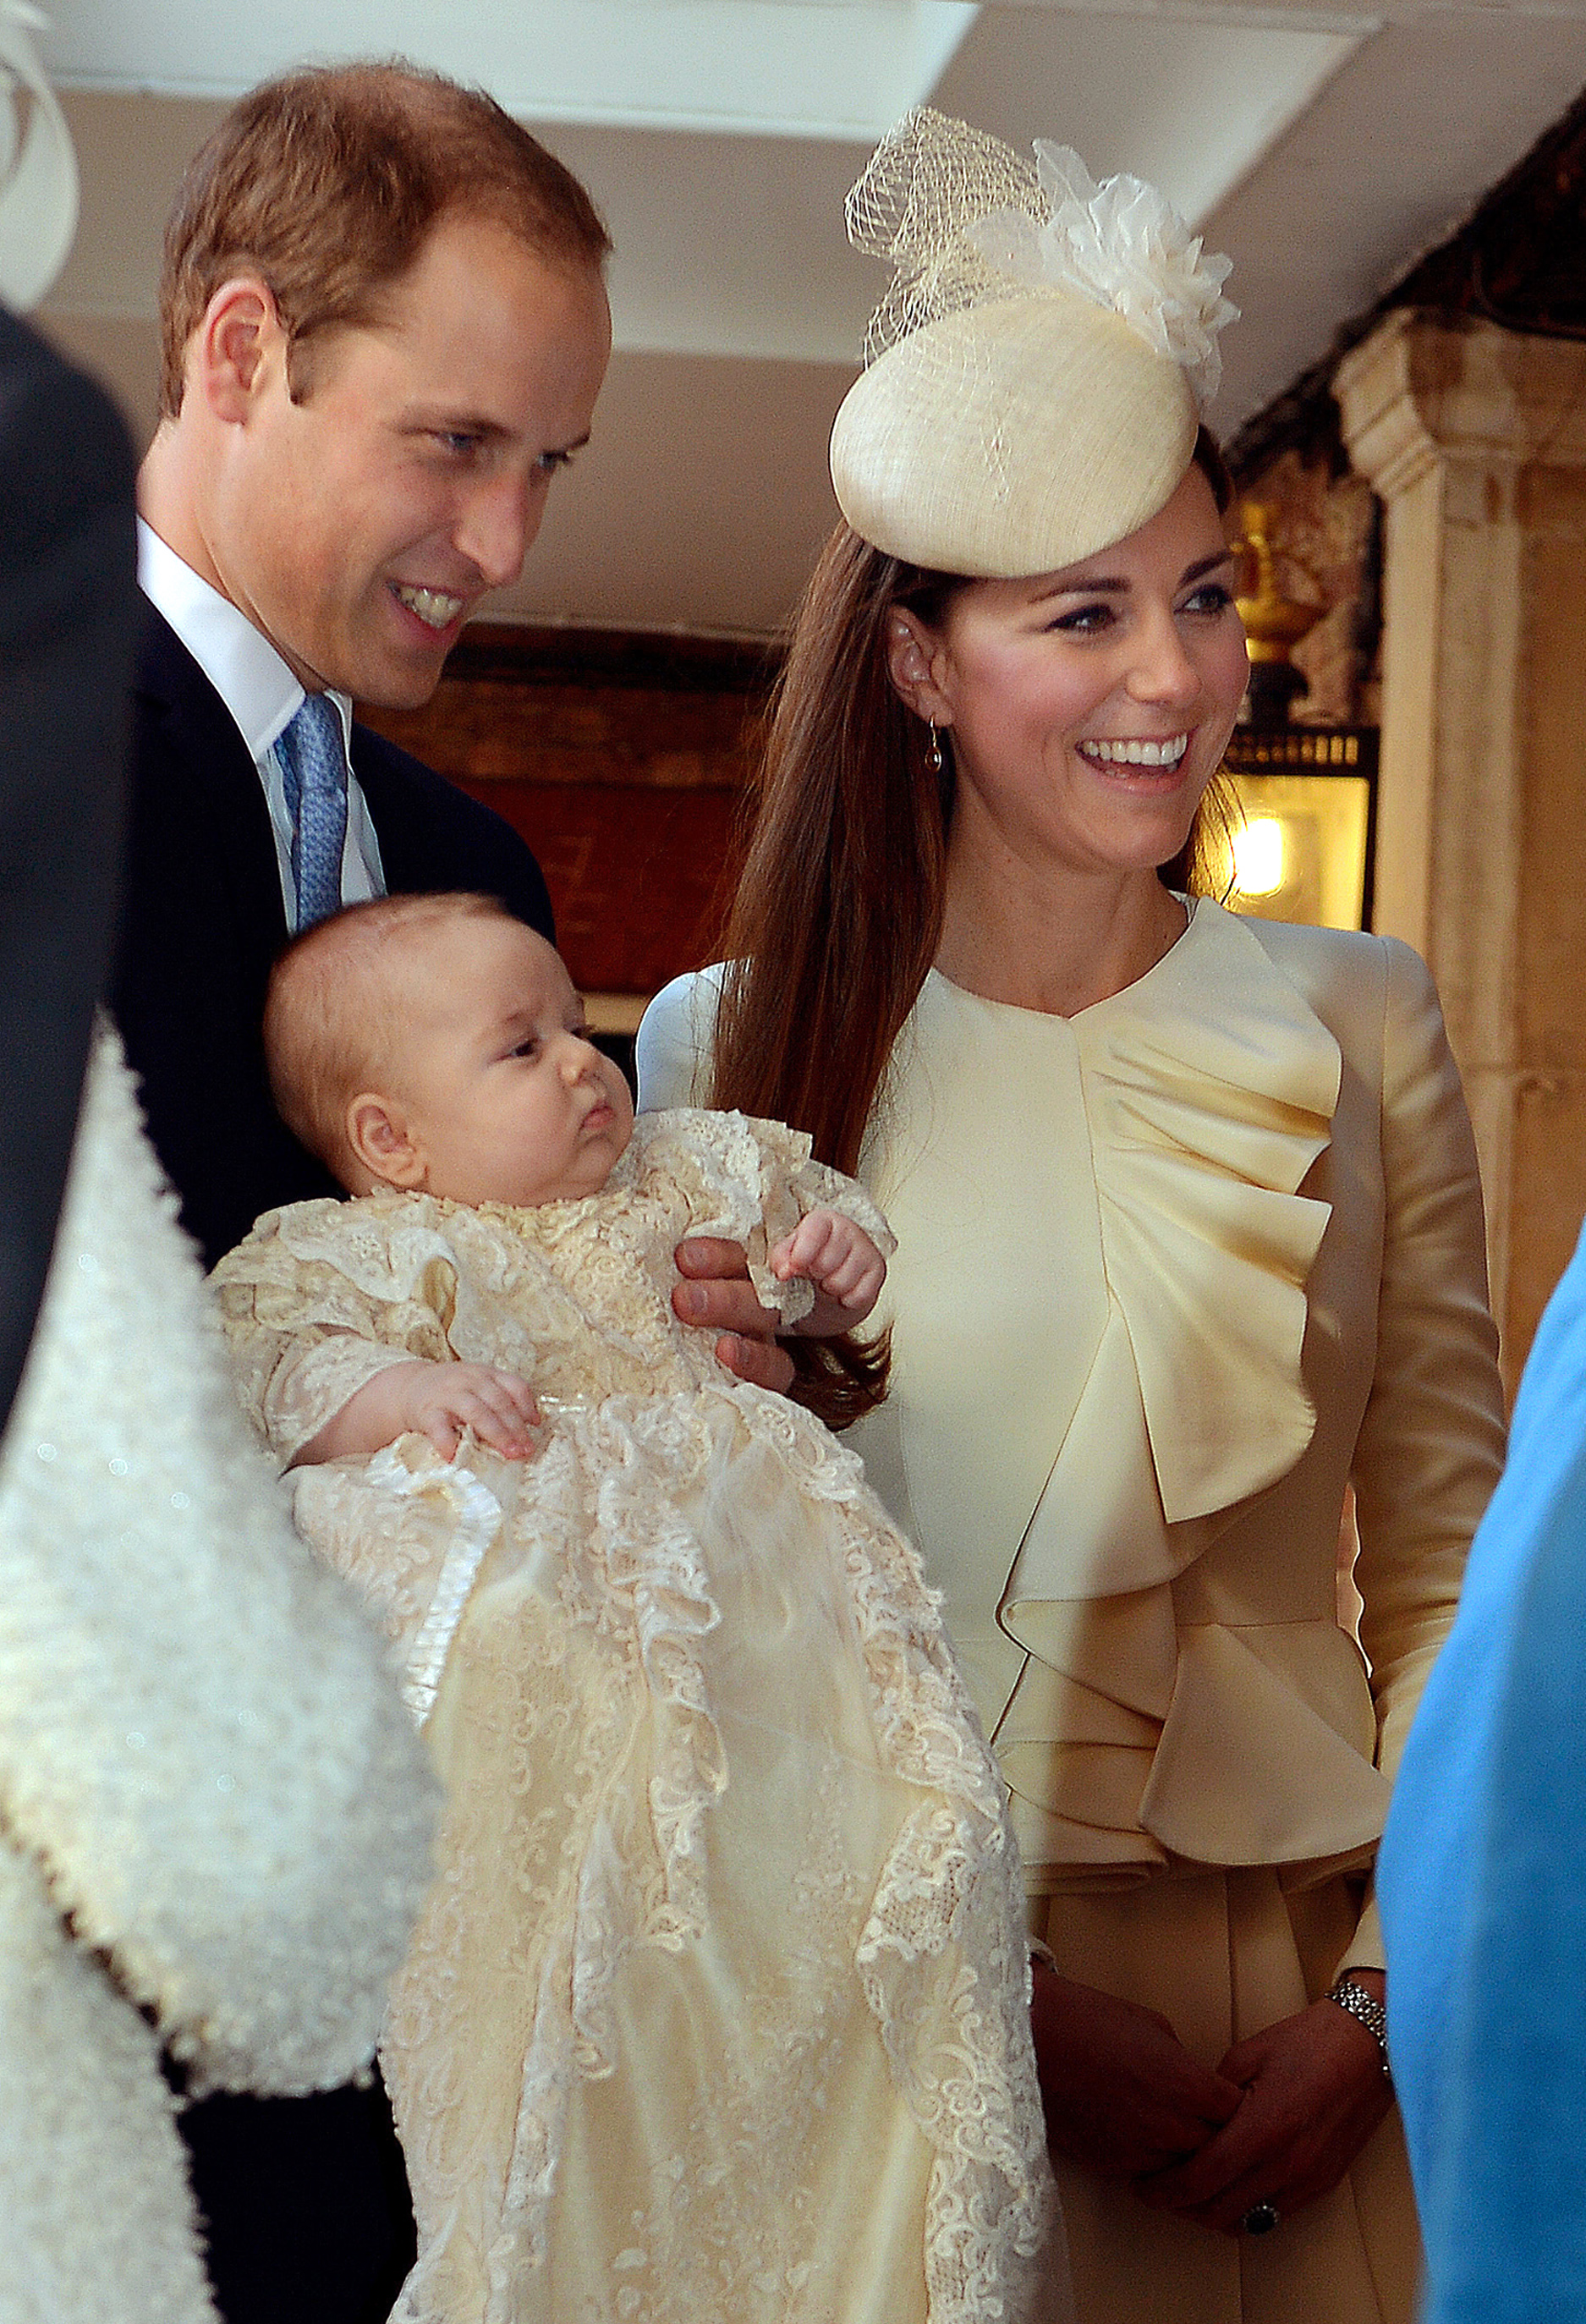 The Duke of Cambridge and his wife Catherine, Duchess of Cambridge, arrive with their son Prince George at Chapel Royal in St James's Palace in central London on October 23, 2013, ahead of the christening of the three month-old prince. (AFP—AFP/Getty Images)